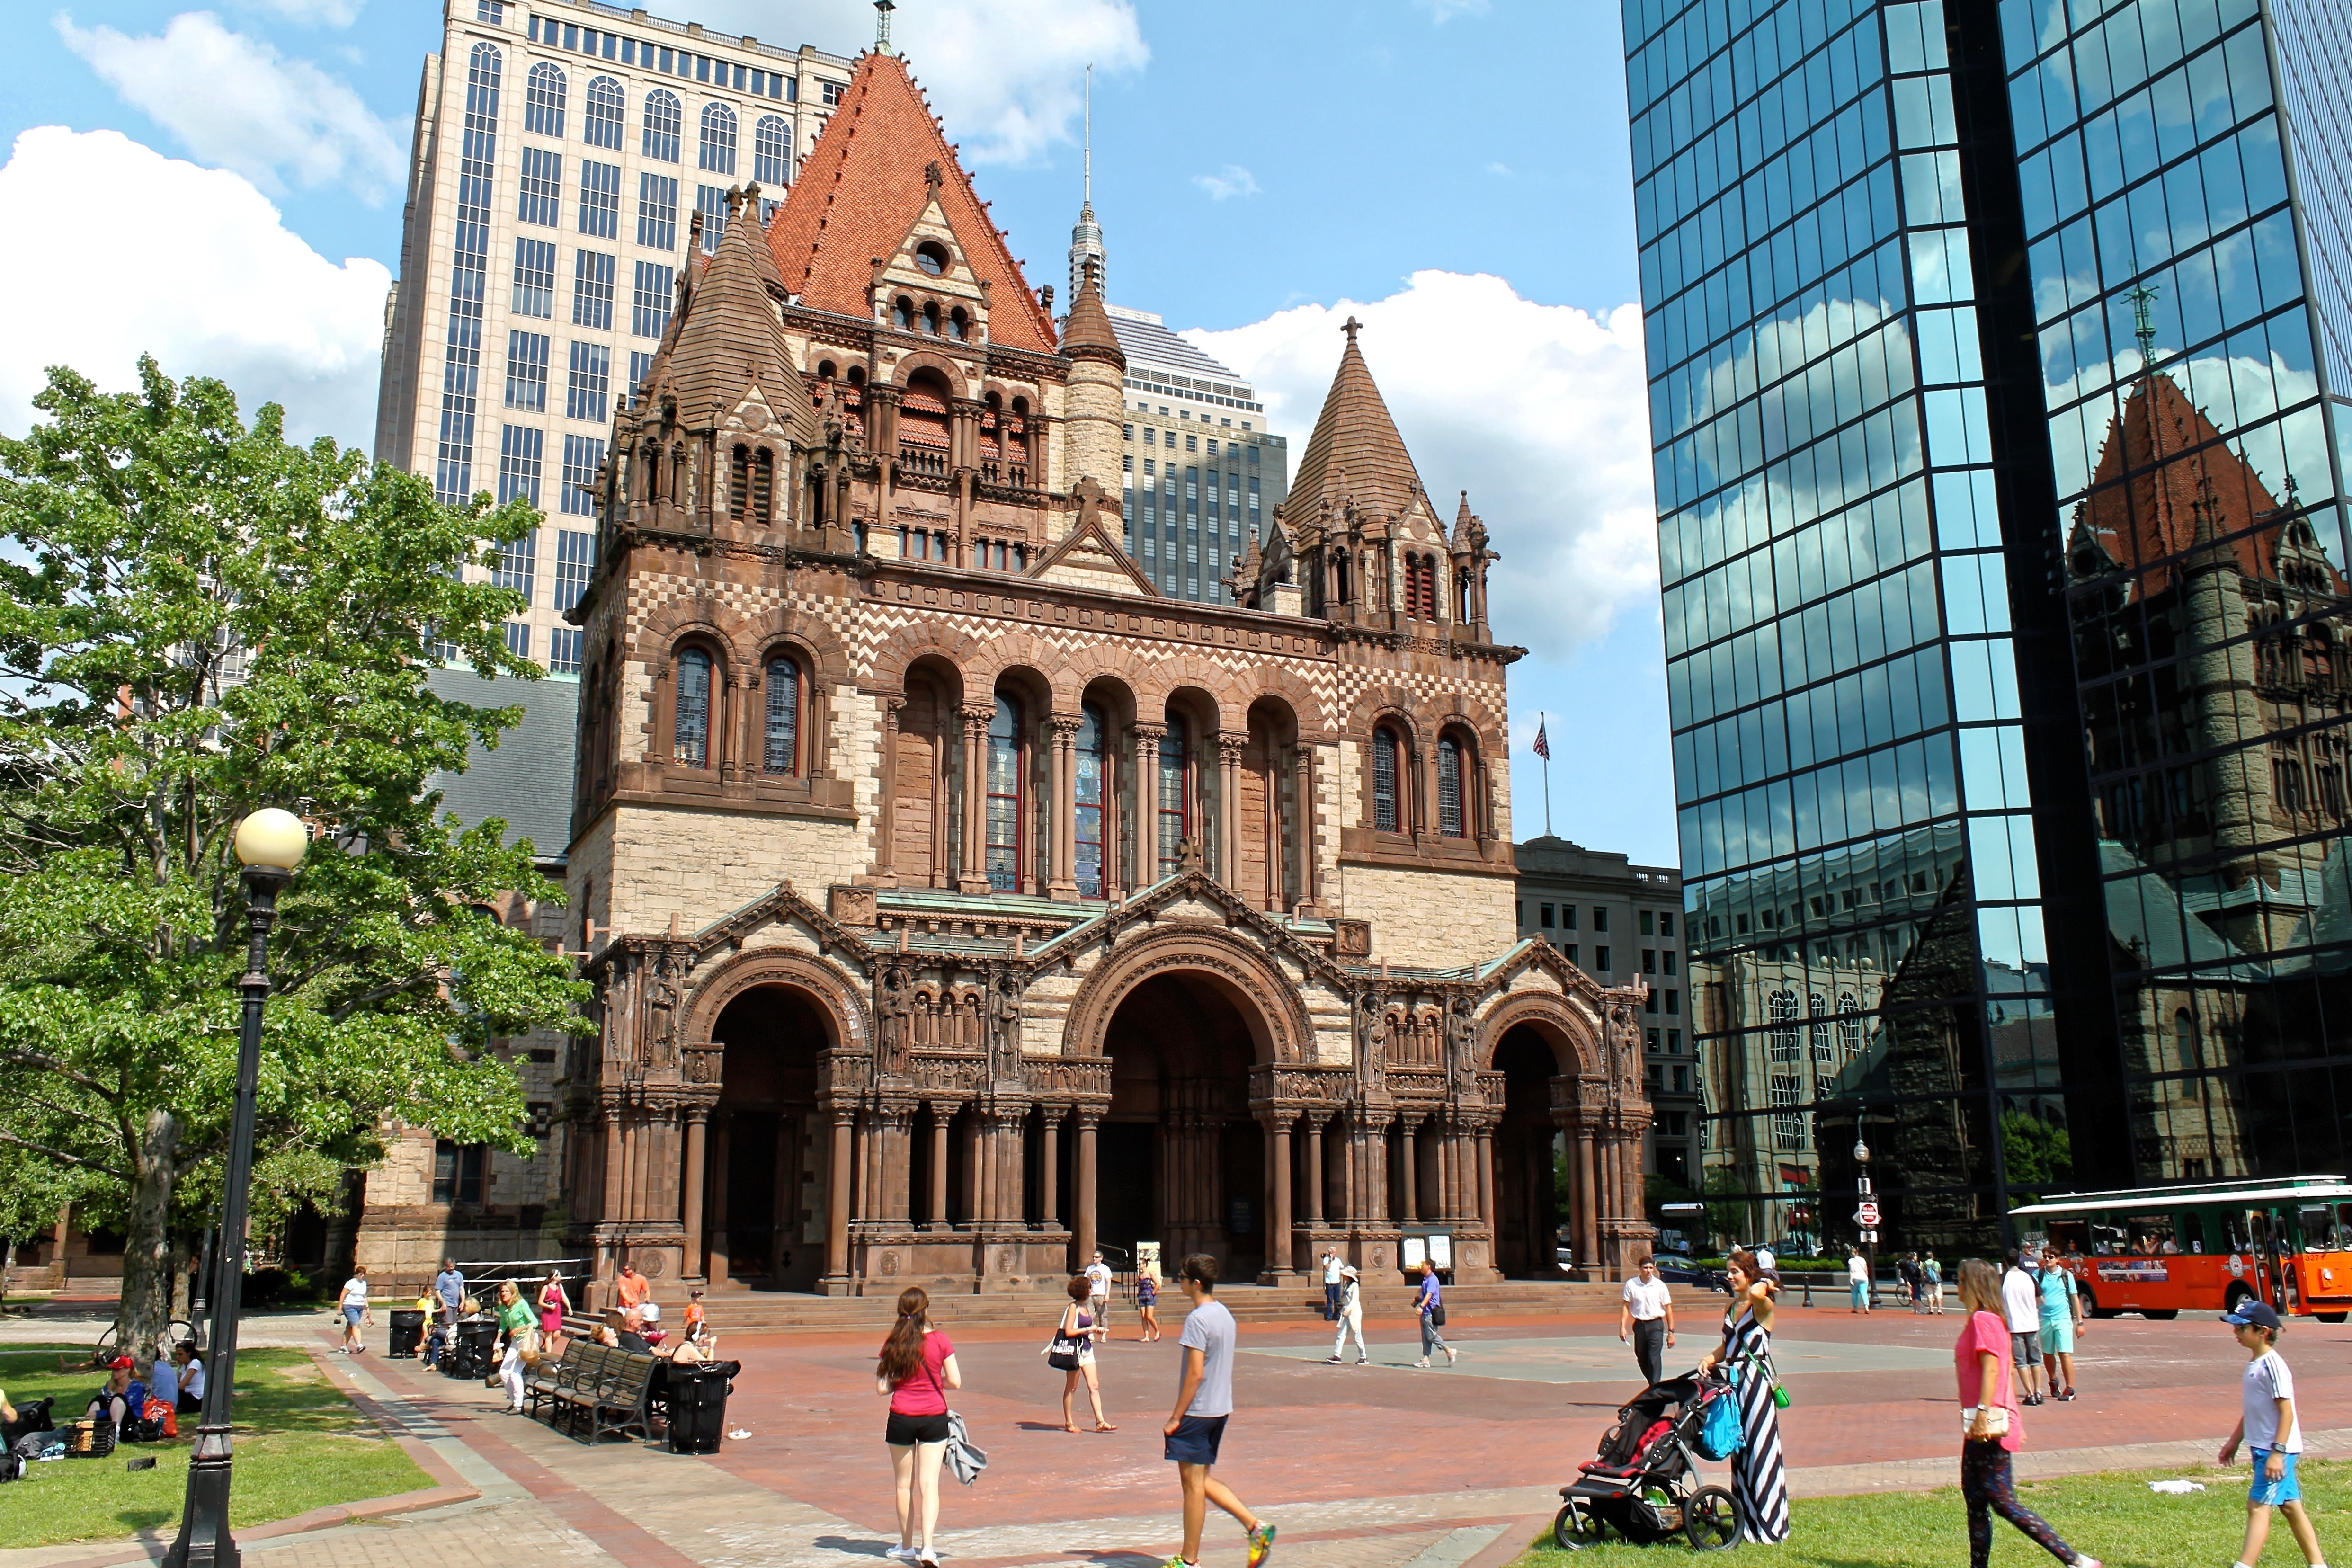 A pedestrian square with a grand church on one side and a modern skyscraper on another.